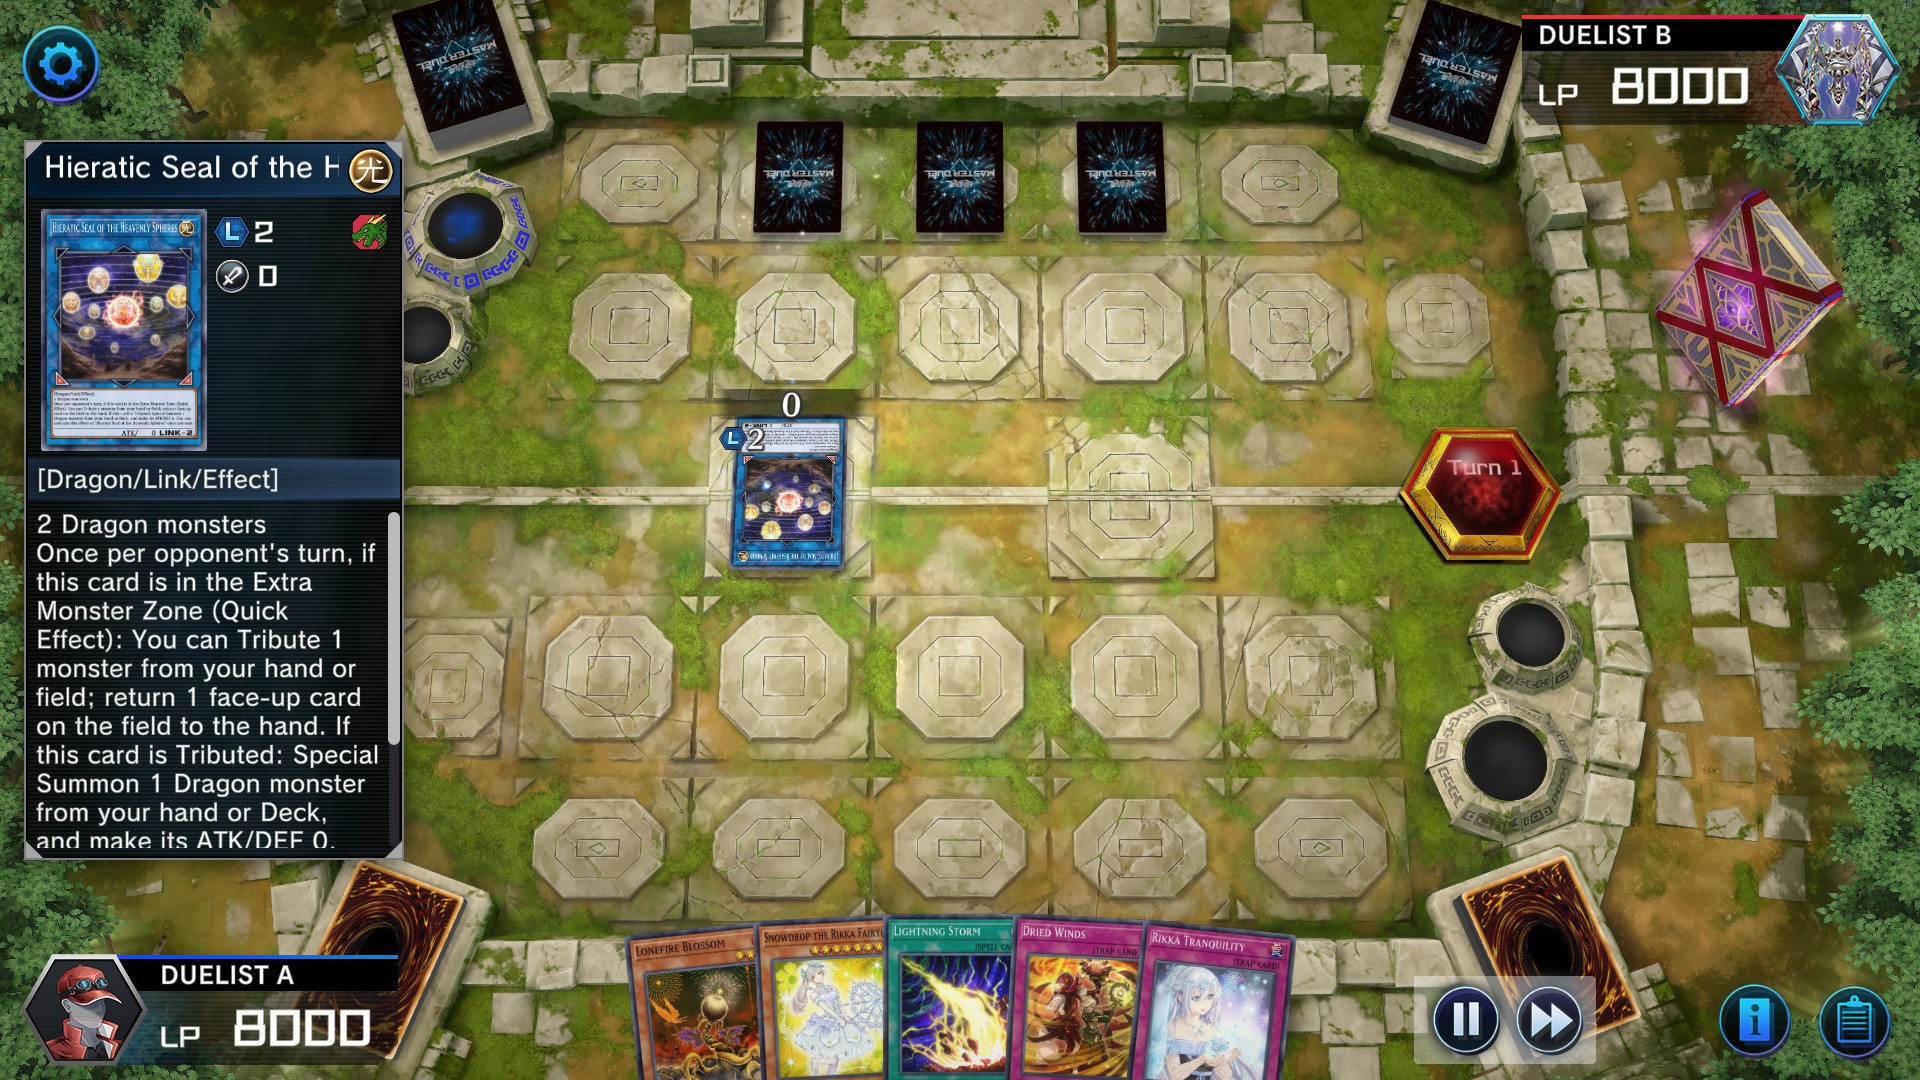 A screenshot of gameplay from Yu-Gi-Oh! Master Duel. A top-down perspective view over a sparsely grassy floor with stone tiling in a nondescript, outdoor setting where cards are being played. Various UI elements frame the screen.